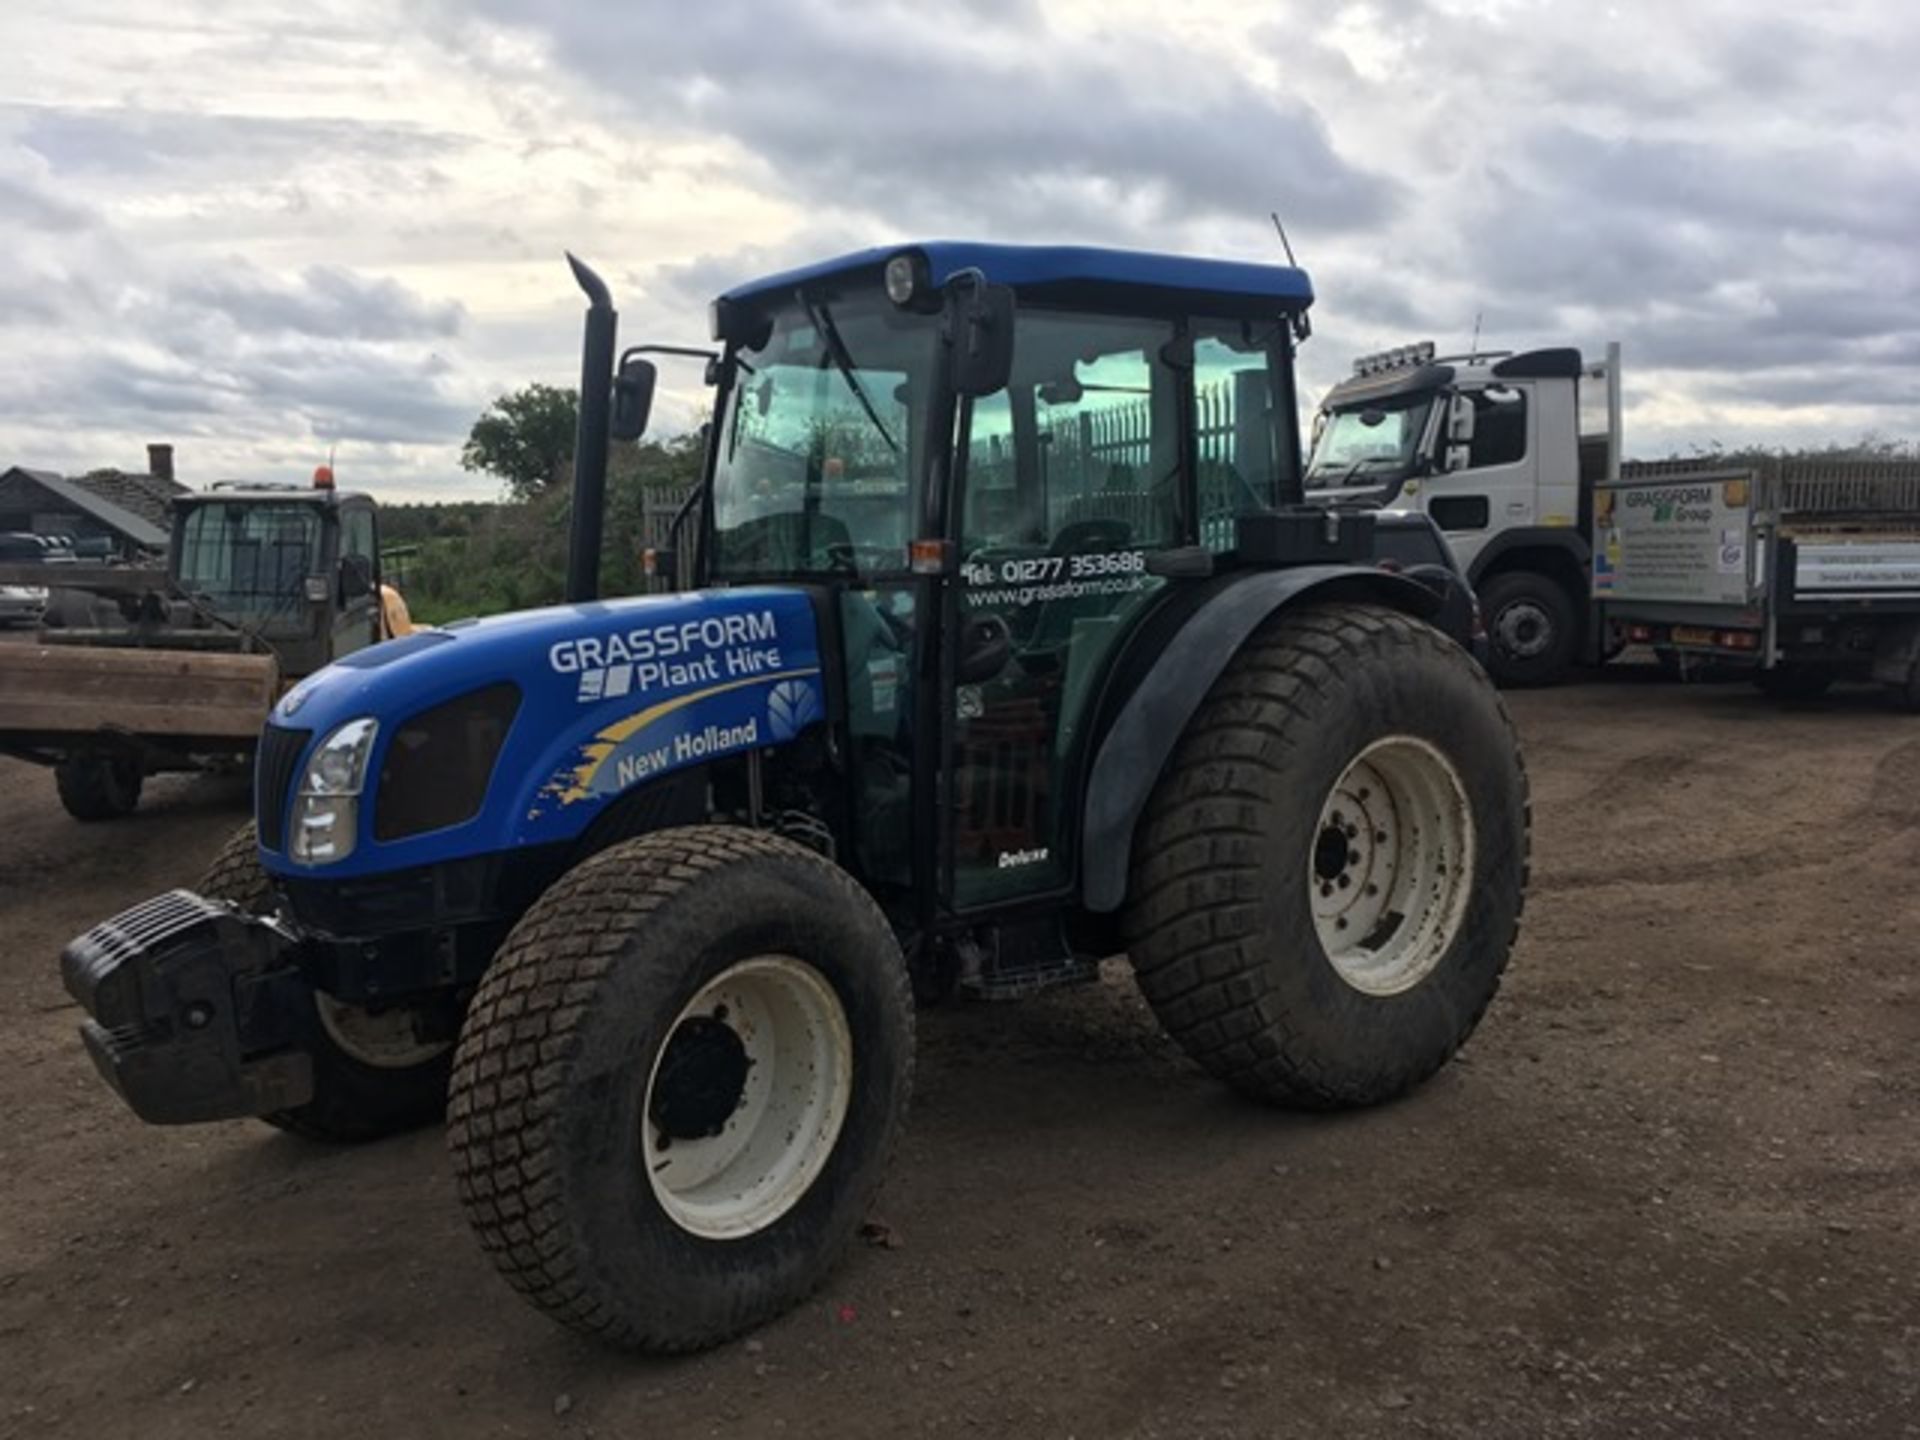 New Holland T4020 tractor fitted with grassland tyres, creep speed gear box, 2 no. exterior - Image 3 of 11